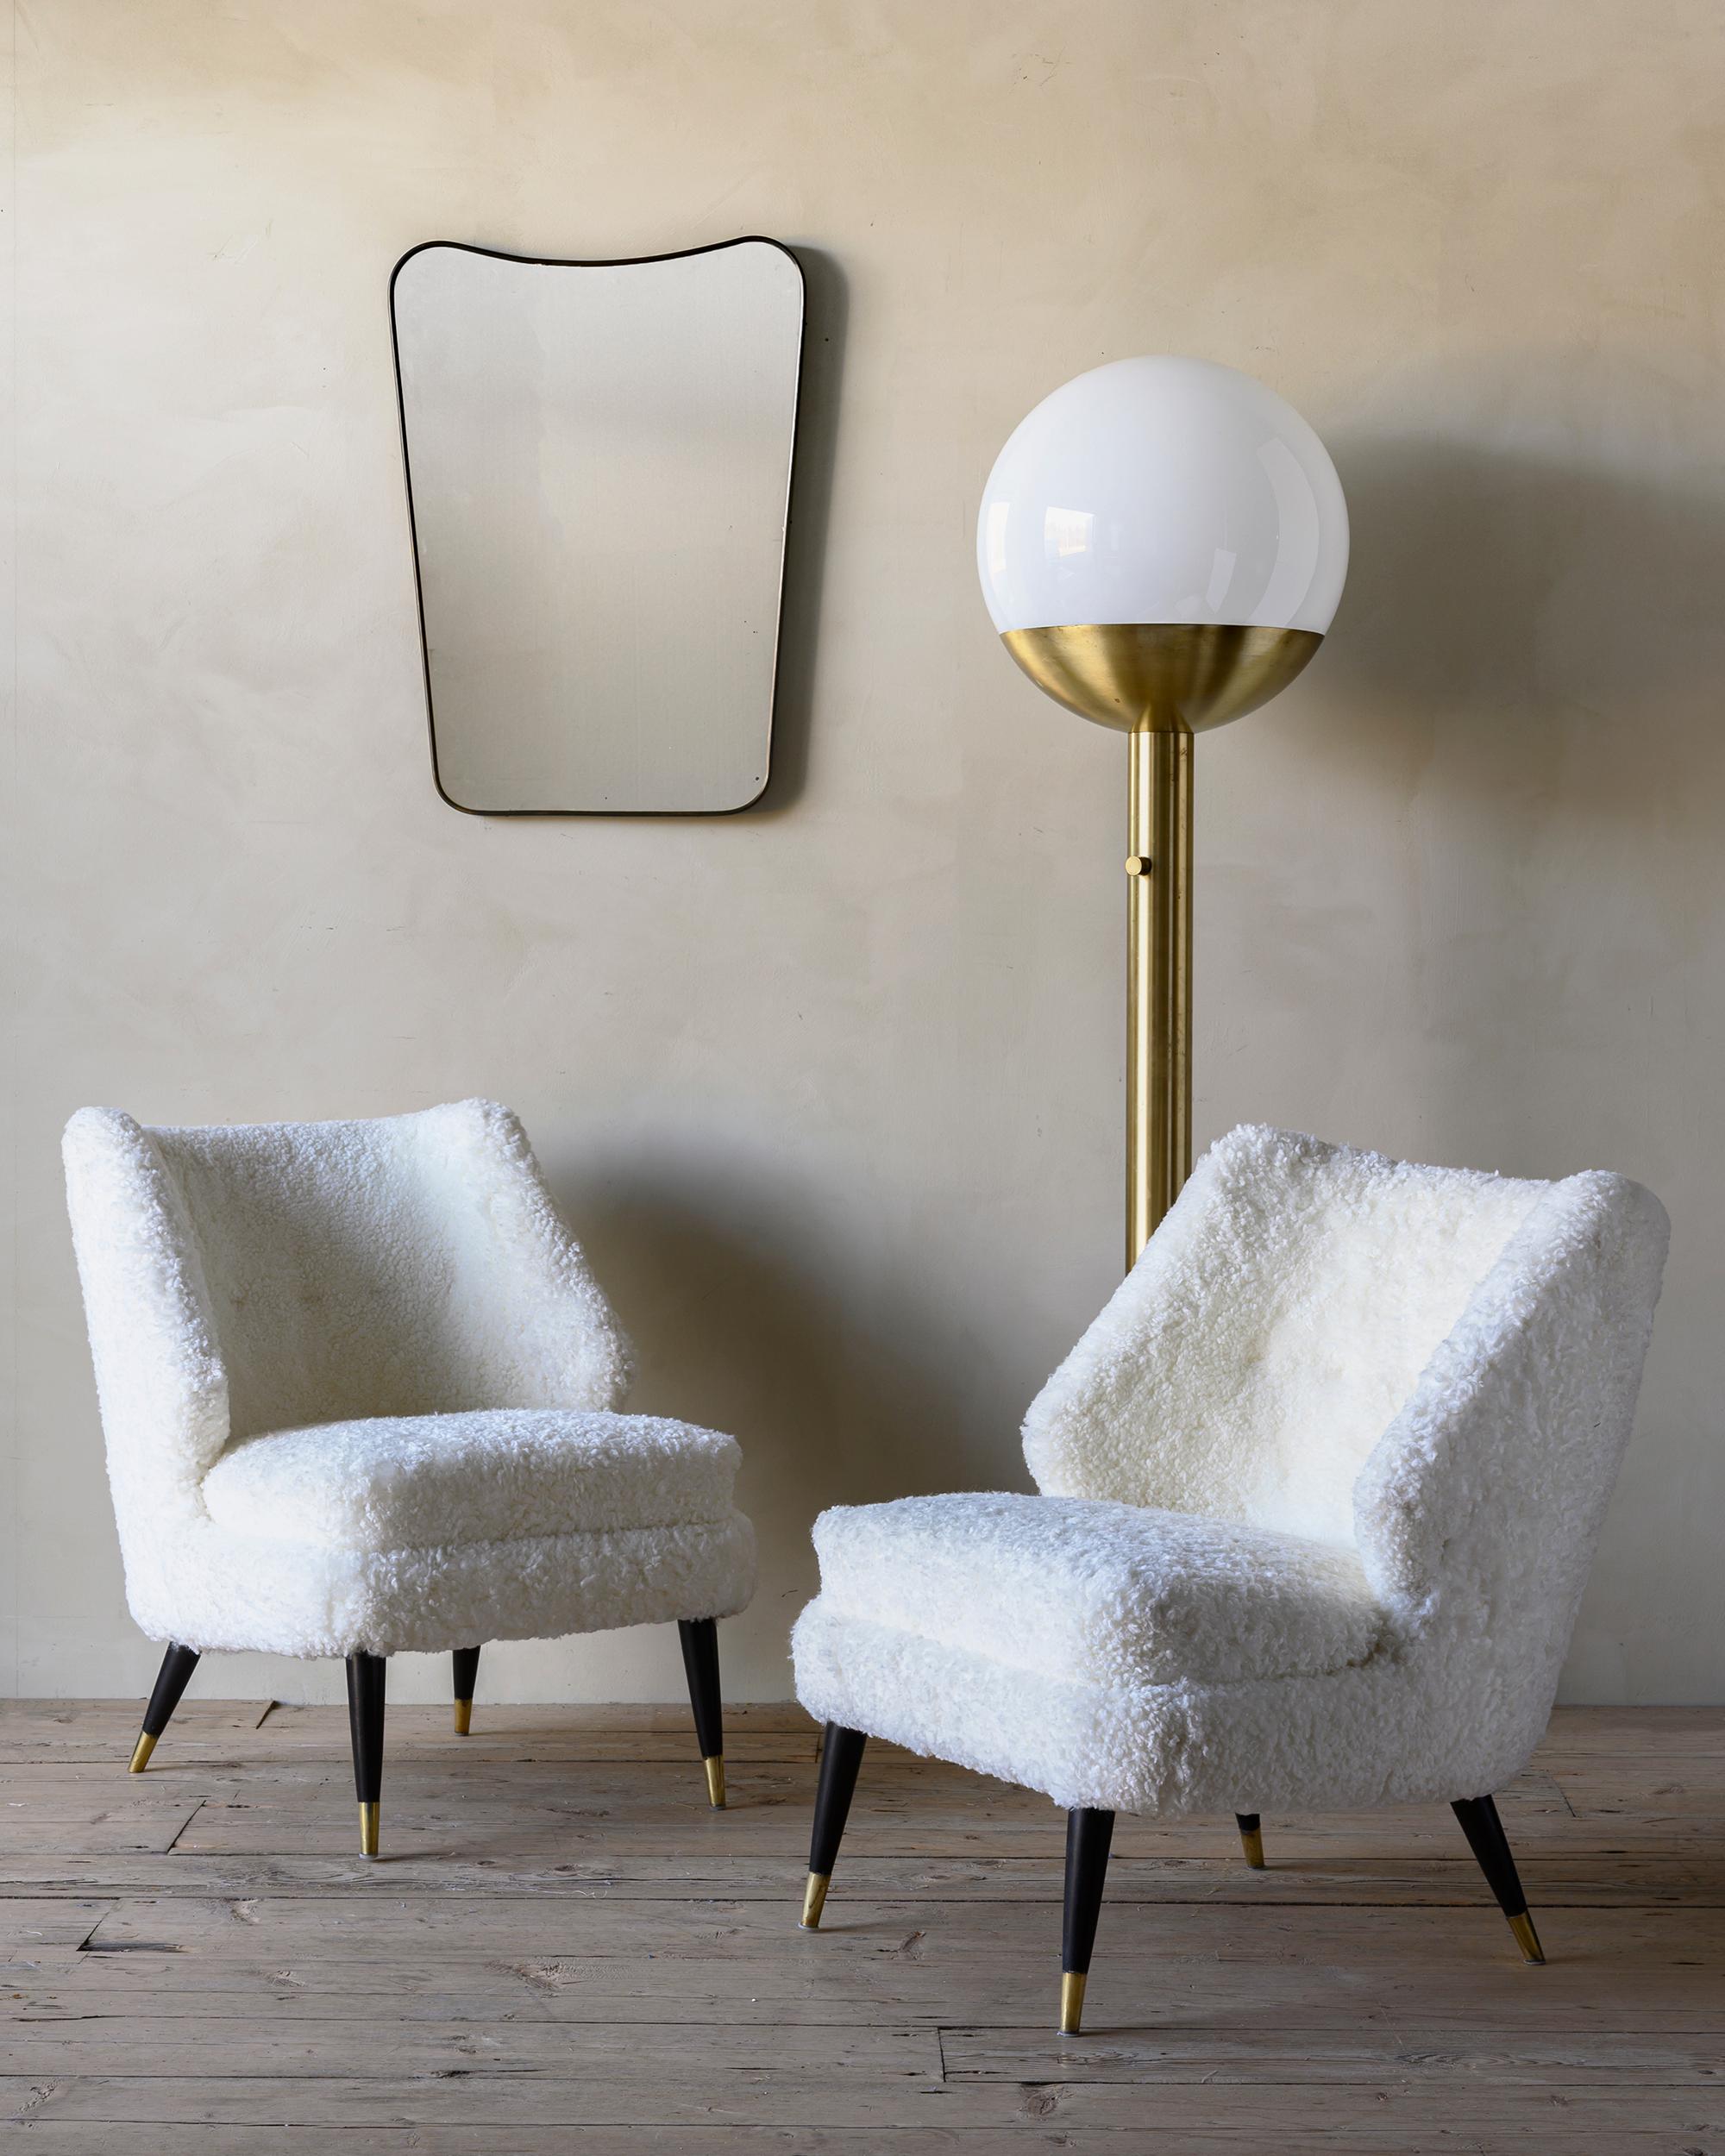 Pair of Danish 1950s armchairs 'Flamingo' designed by Arne Wahl Iversen in 1955. Reupholstered in white Sheepskin Shearling. 

Arne Wahl Iversen was born in 1927 in the small town of Nyborg in Denmark. He grew up in his fathers' furniture store